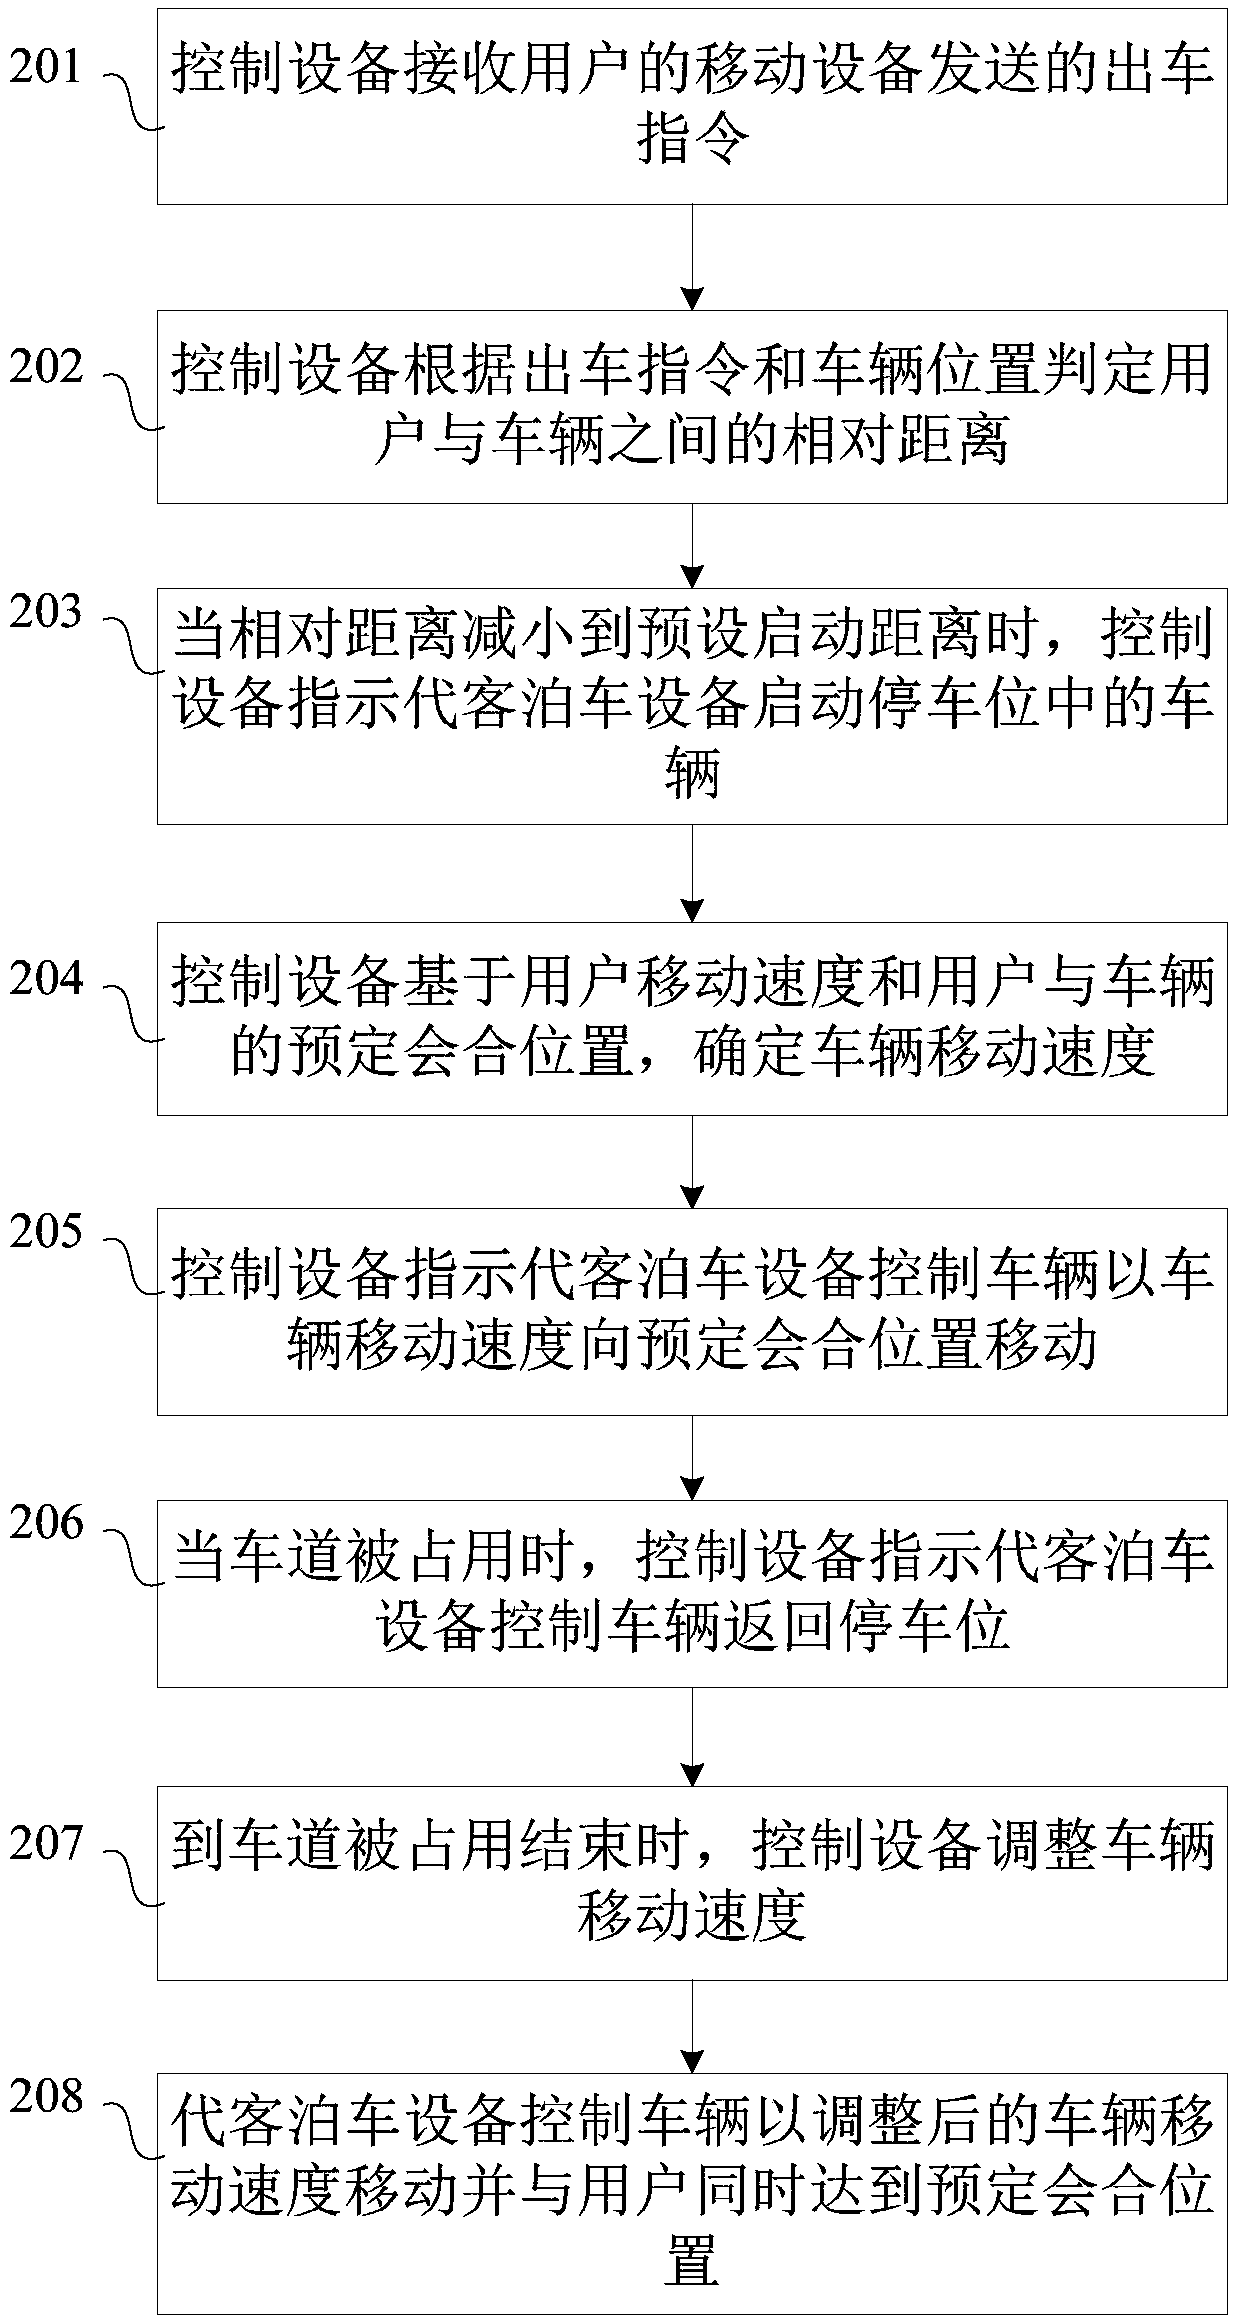 Vehicle automatic control method, equipment and system